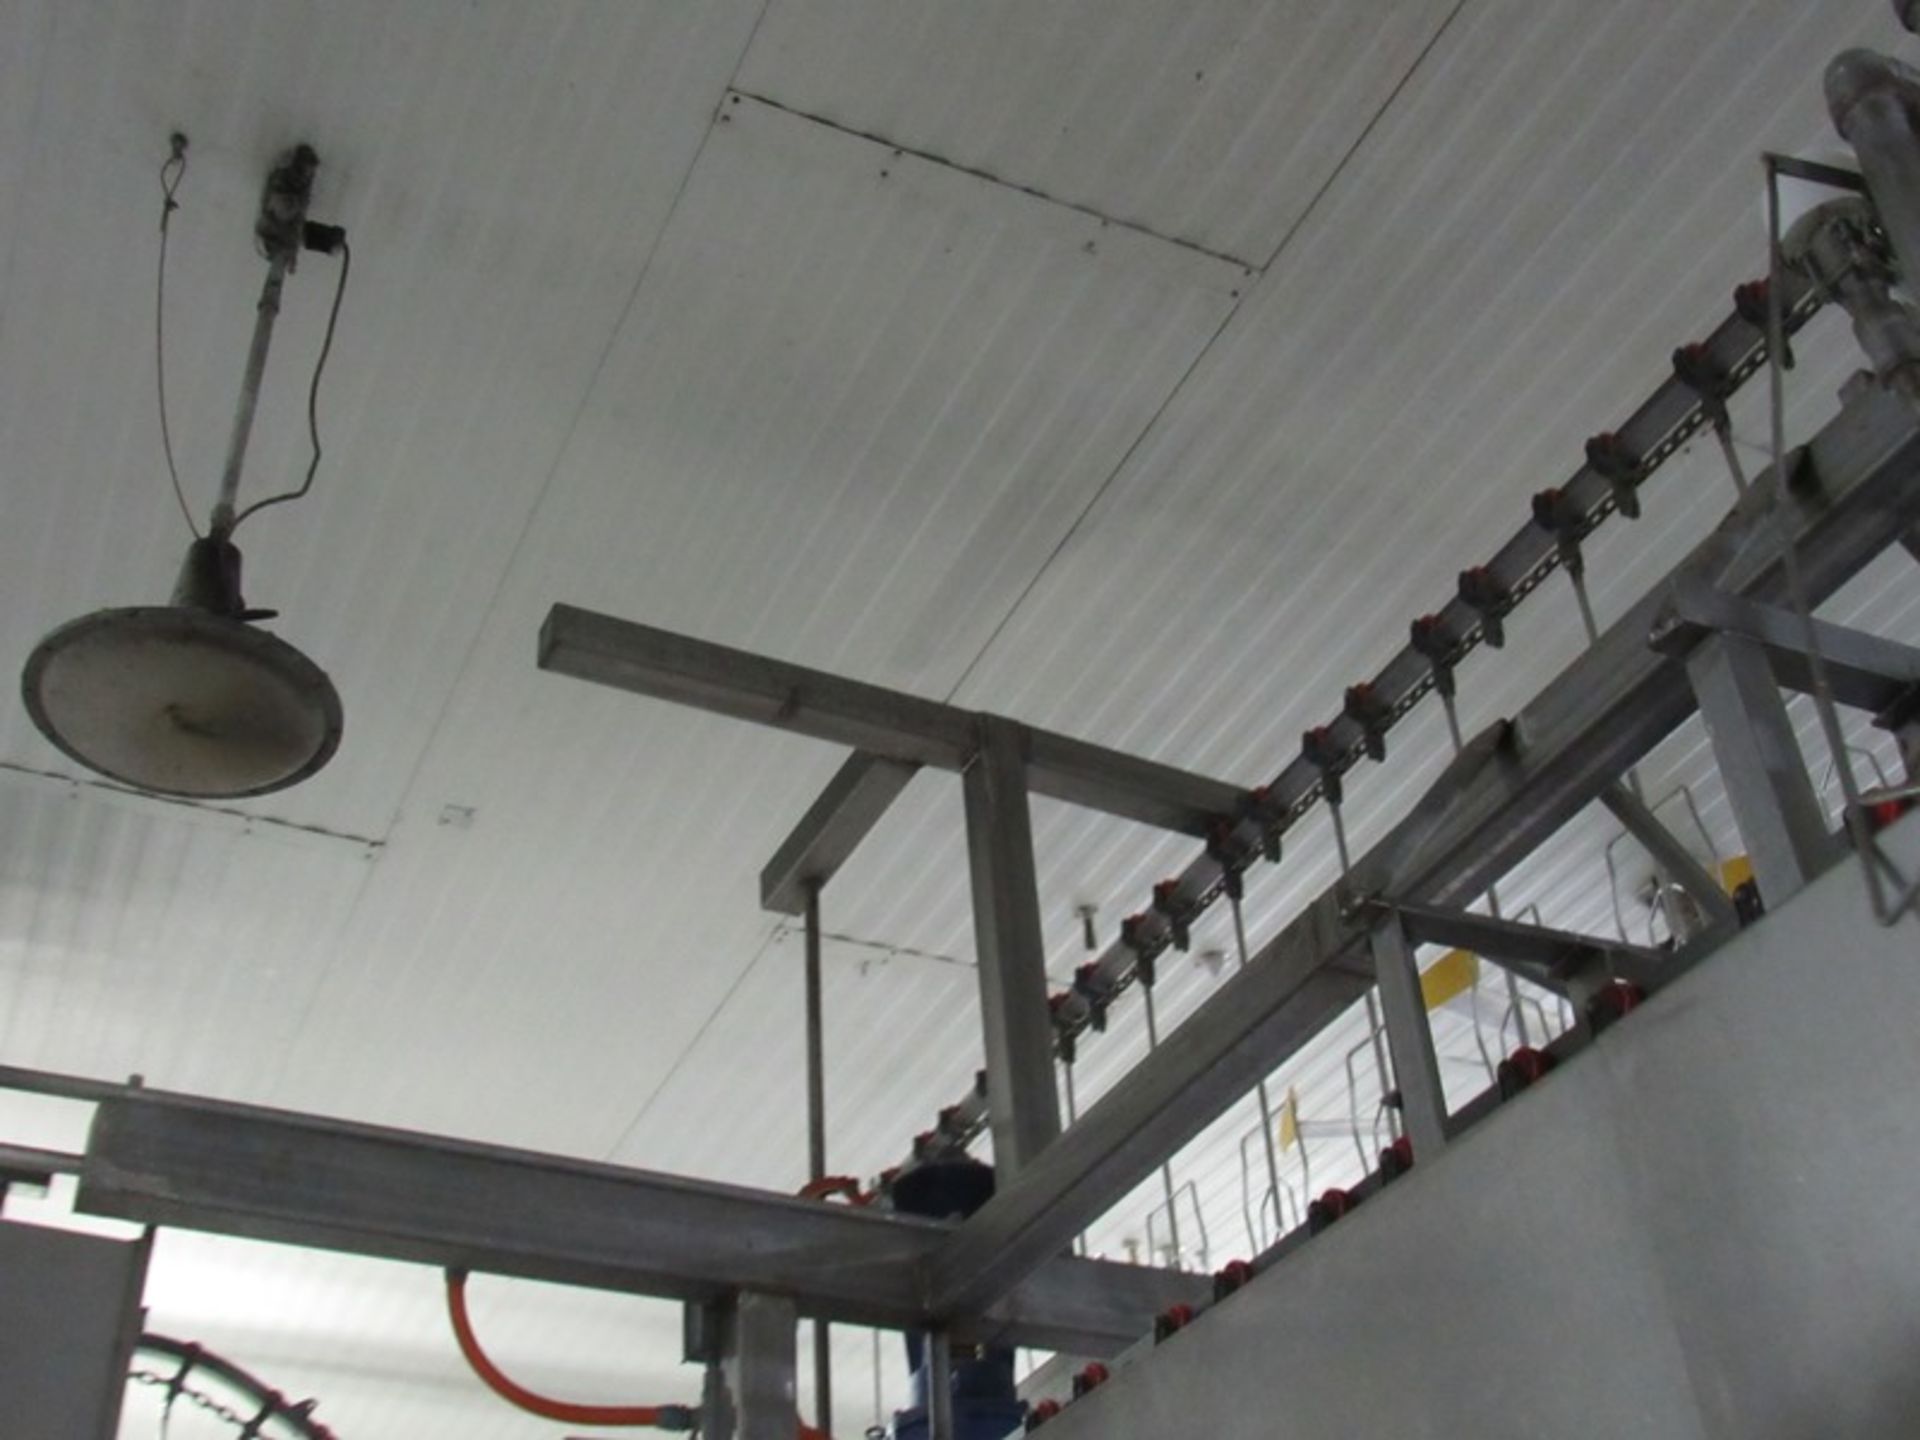 Lot Stainless Steel Structure Throughout Process Floor Overhead and Floor Level | Rig Fee: $5625 - Image 10 of 34